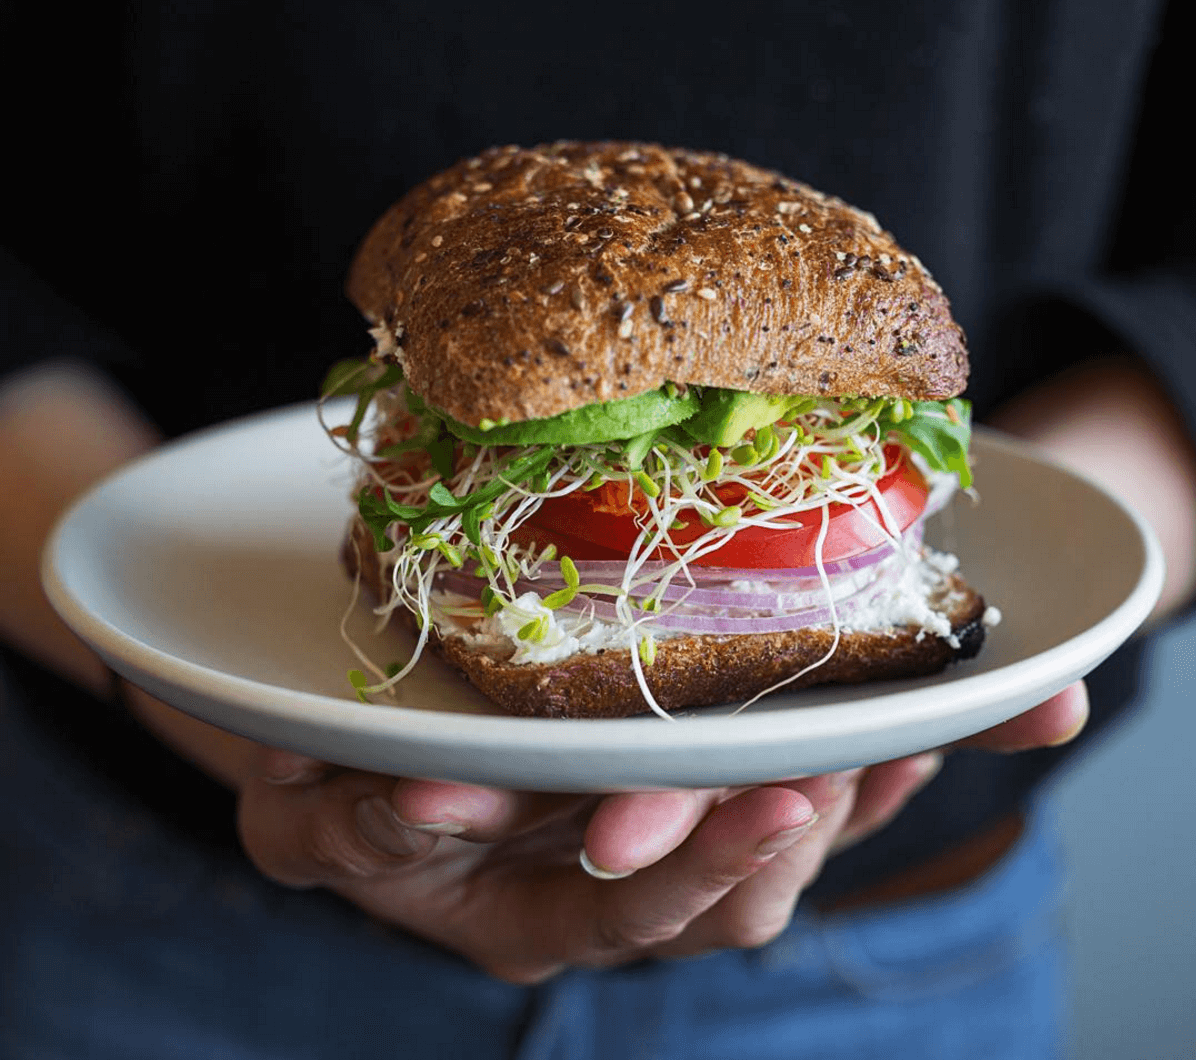 Shop-Specialties-Munchery-Home-Food-Delivery-Sandwich